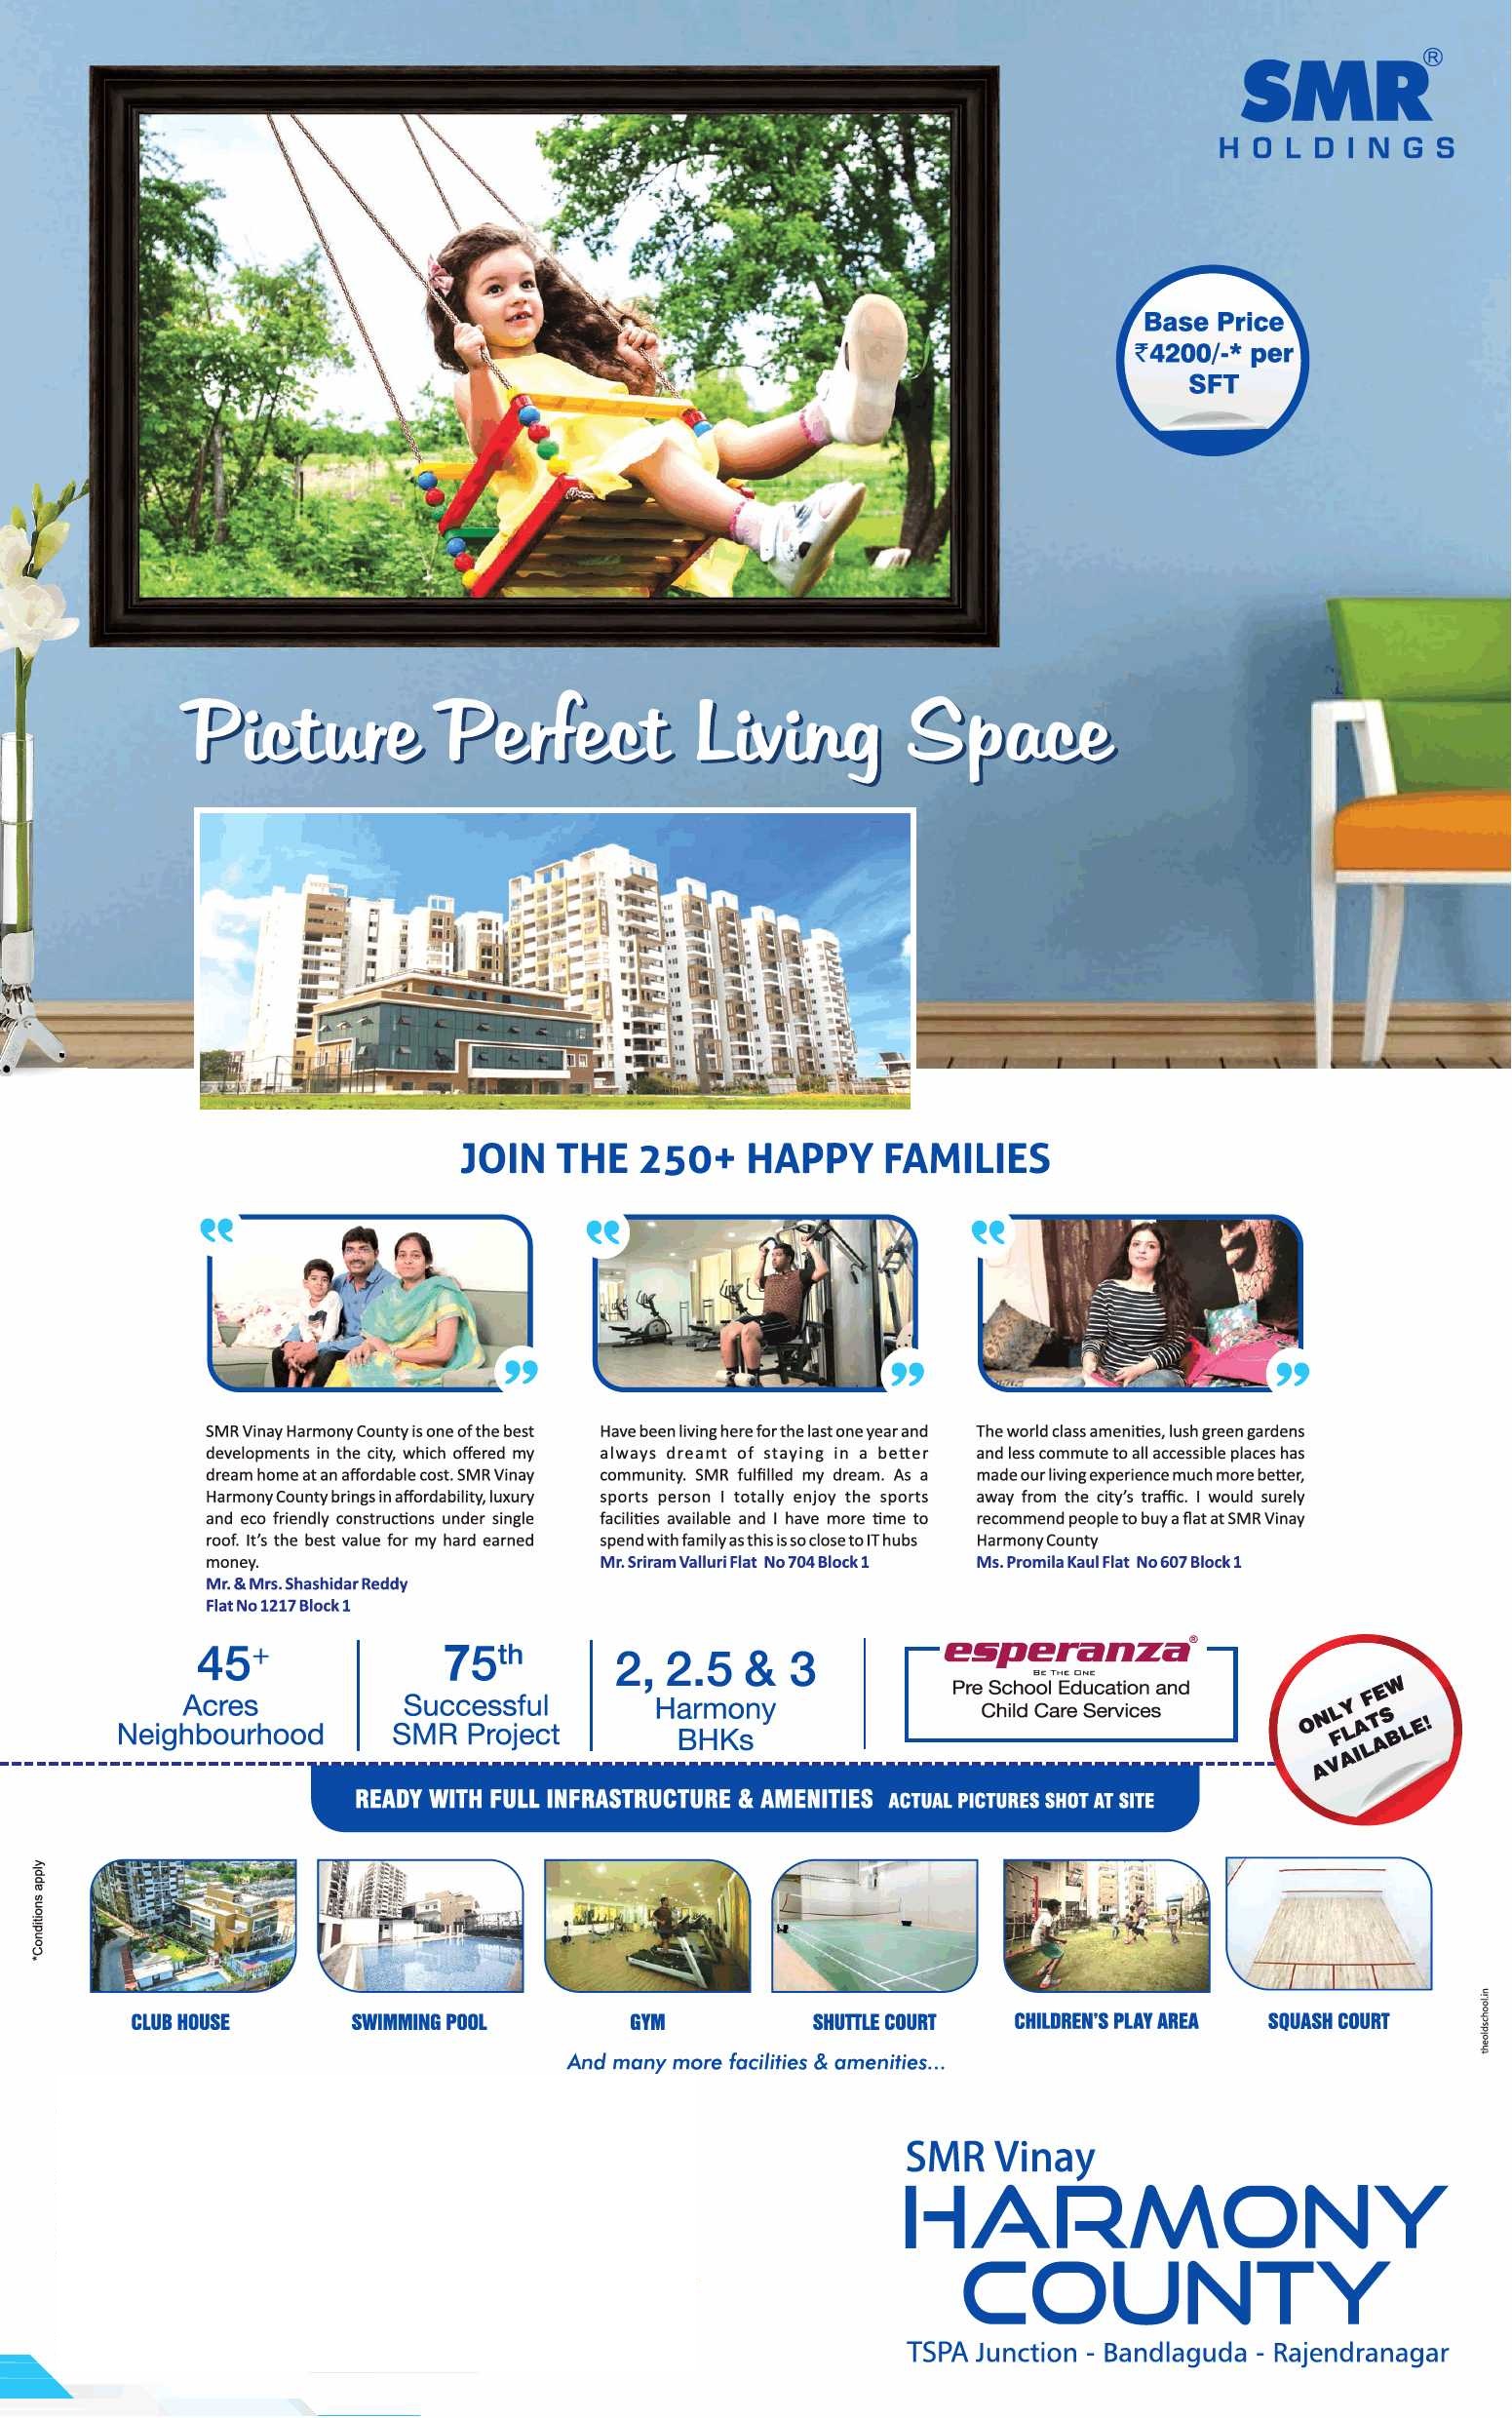 Book harmony bhk's @ 4200 per sq.ft. at SMR Vinay Harmony County in Hyderabad